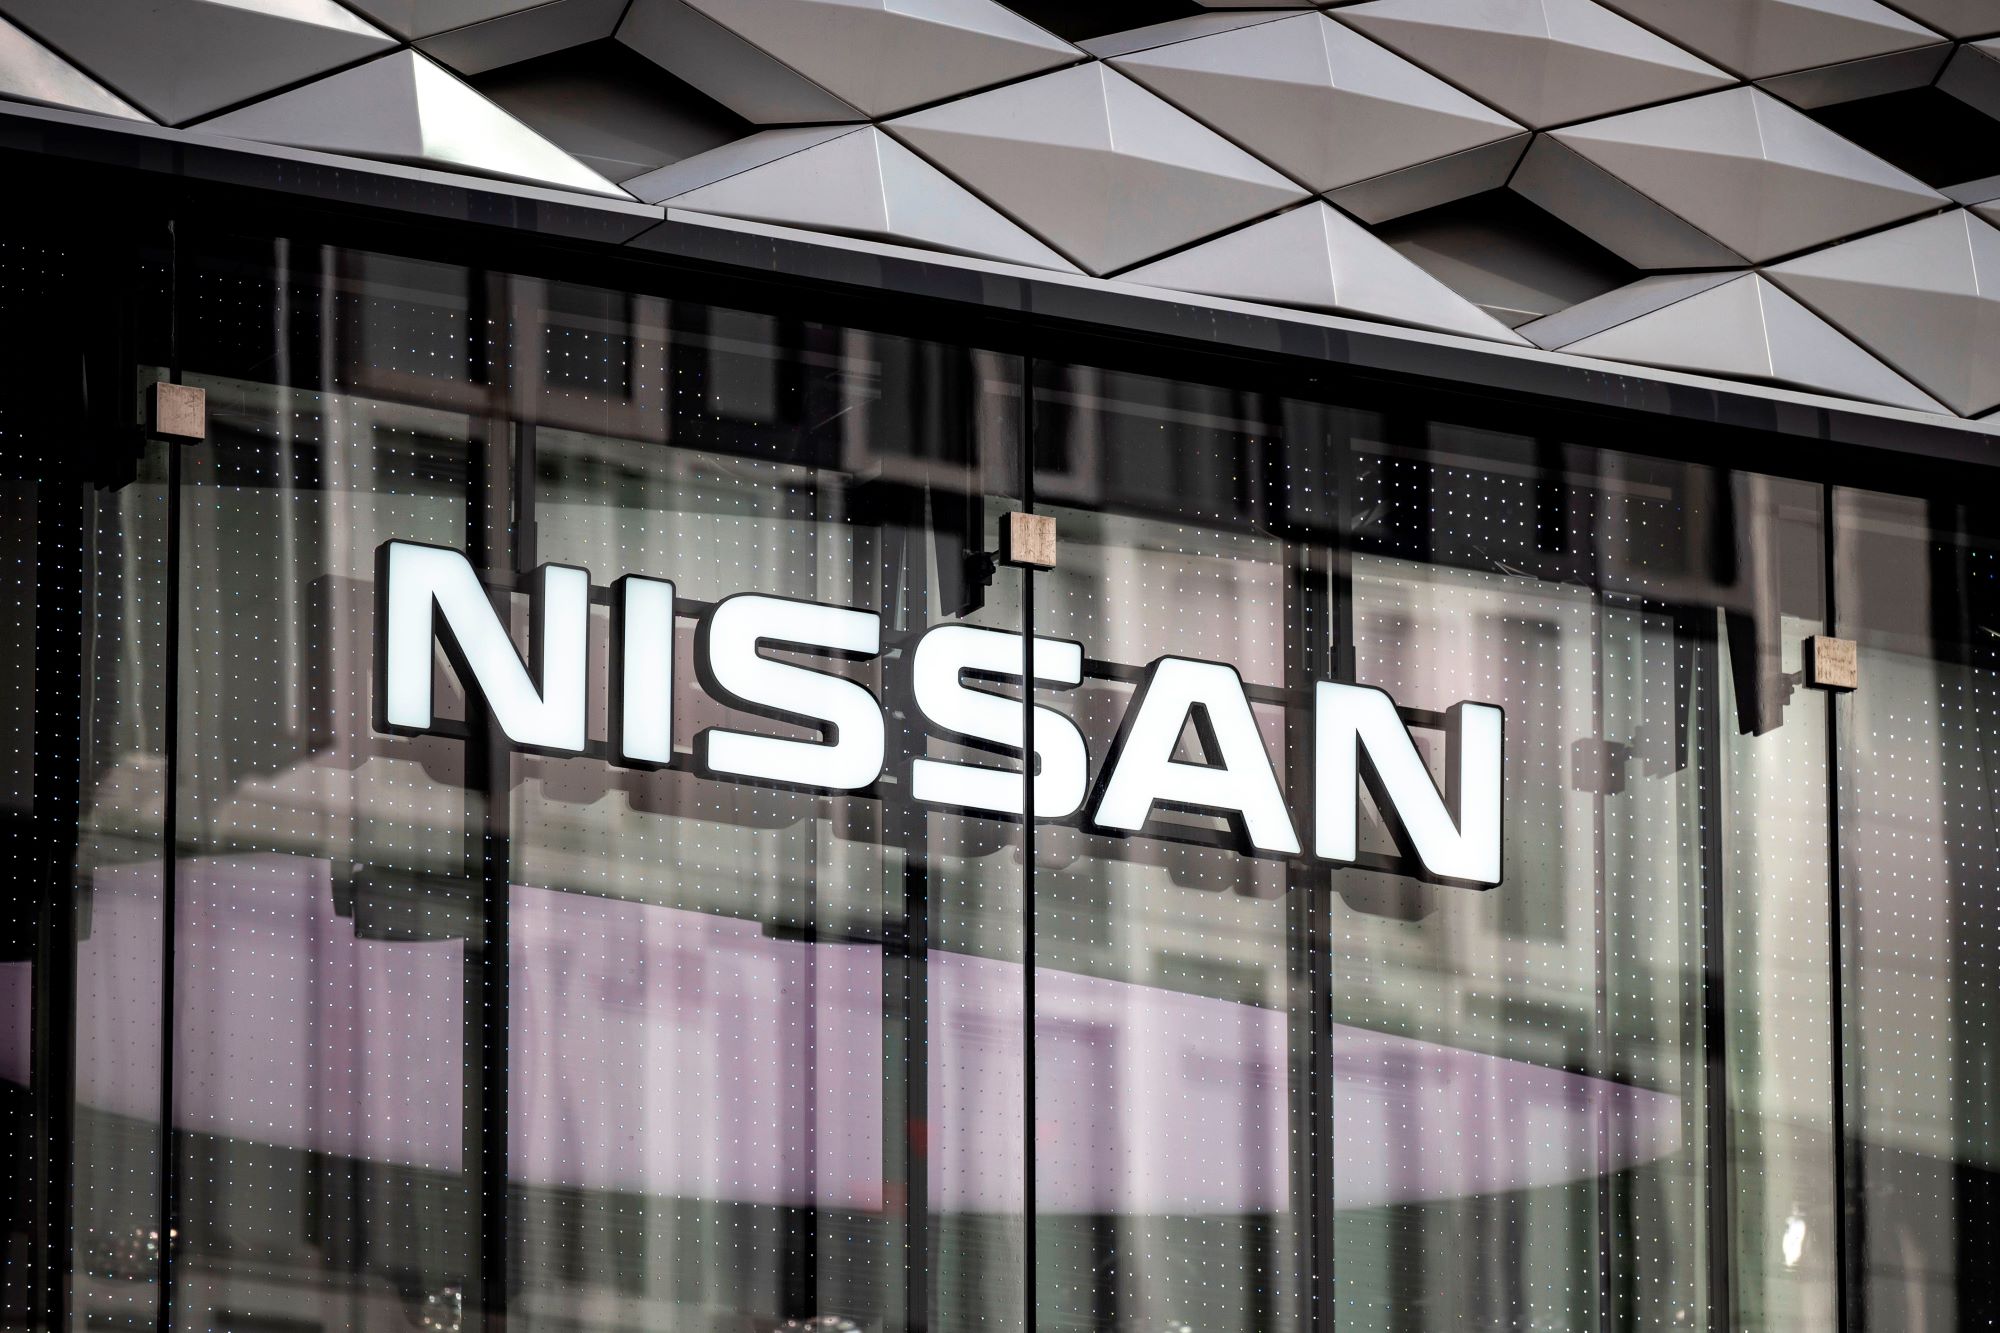 A building with tall glass doors and Nissan, who ensures the best new car smell, written on the side.